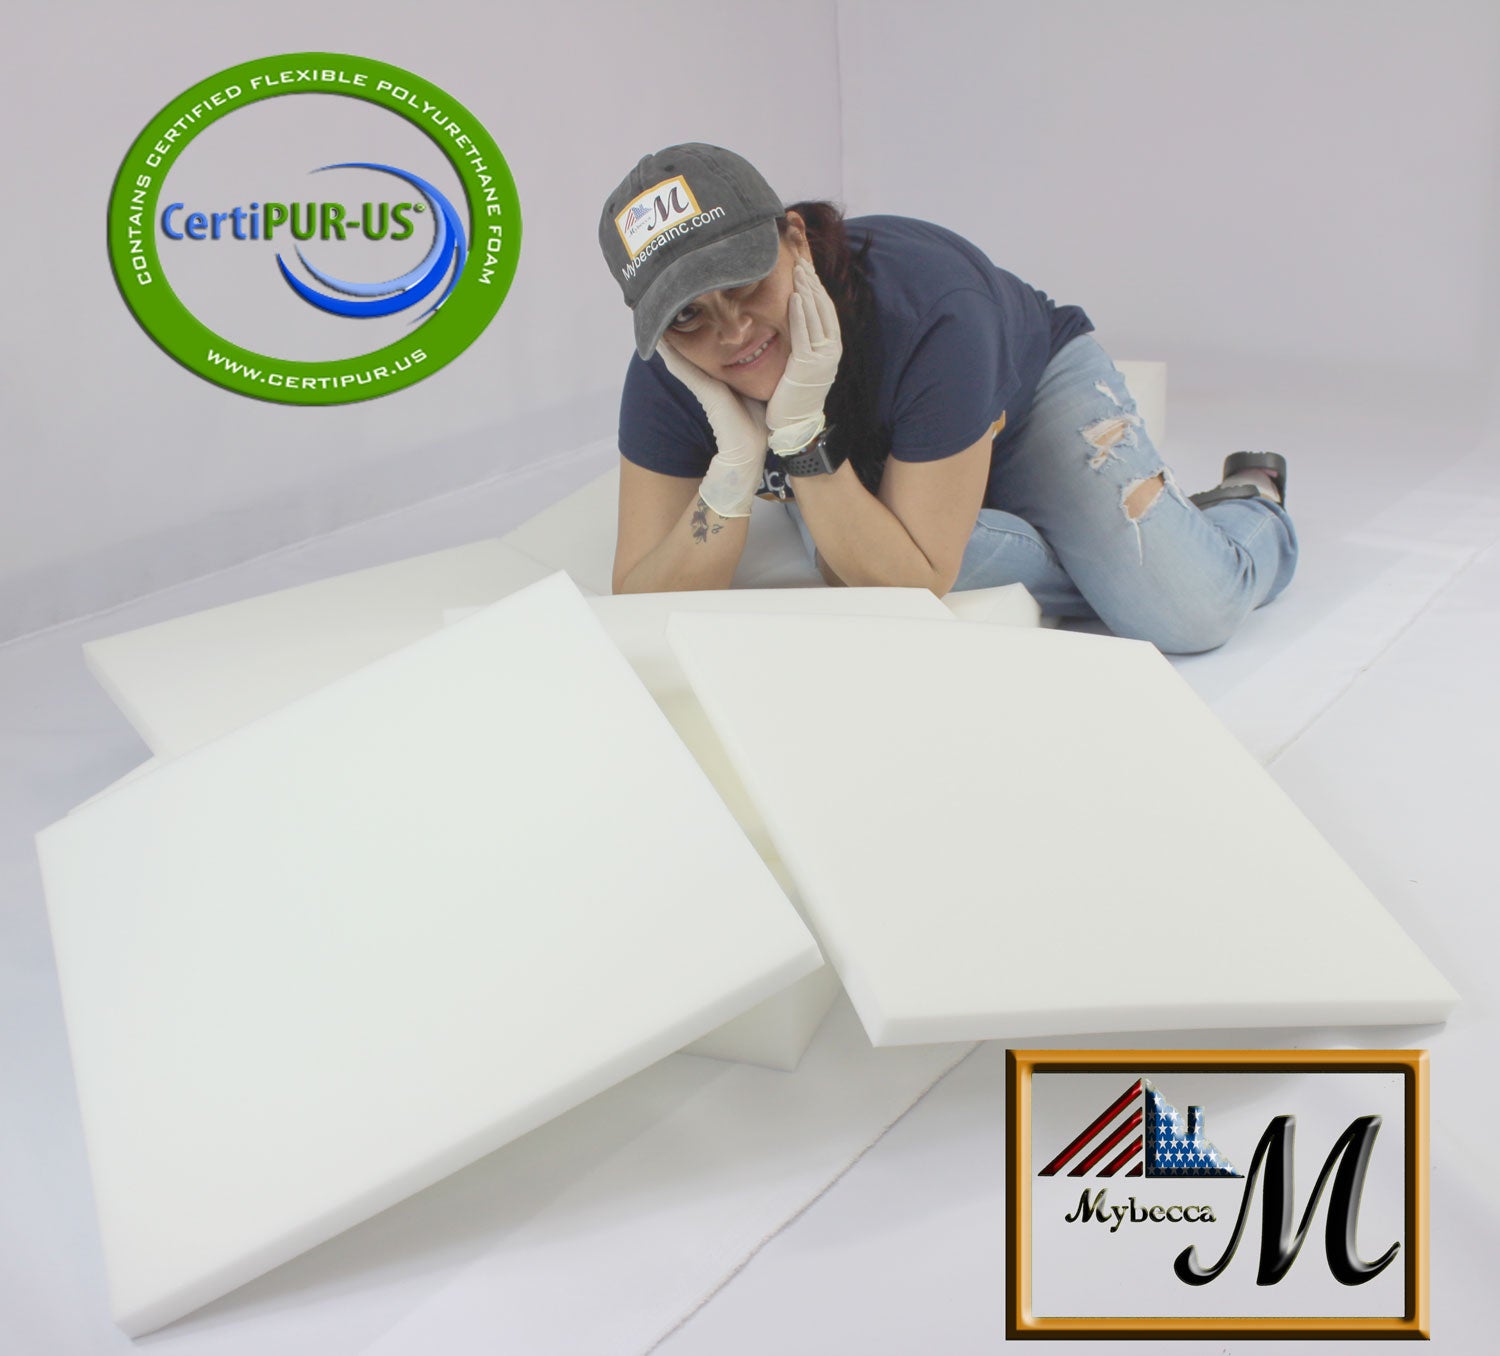 Foamy Foam High Density 6 inch Thick, 24 inch Wide, 72 inch Long Upholstery  Foam, Cushion Replacement